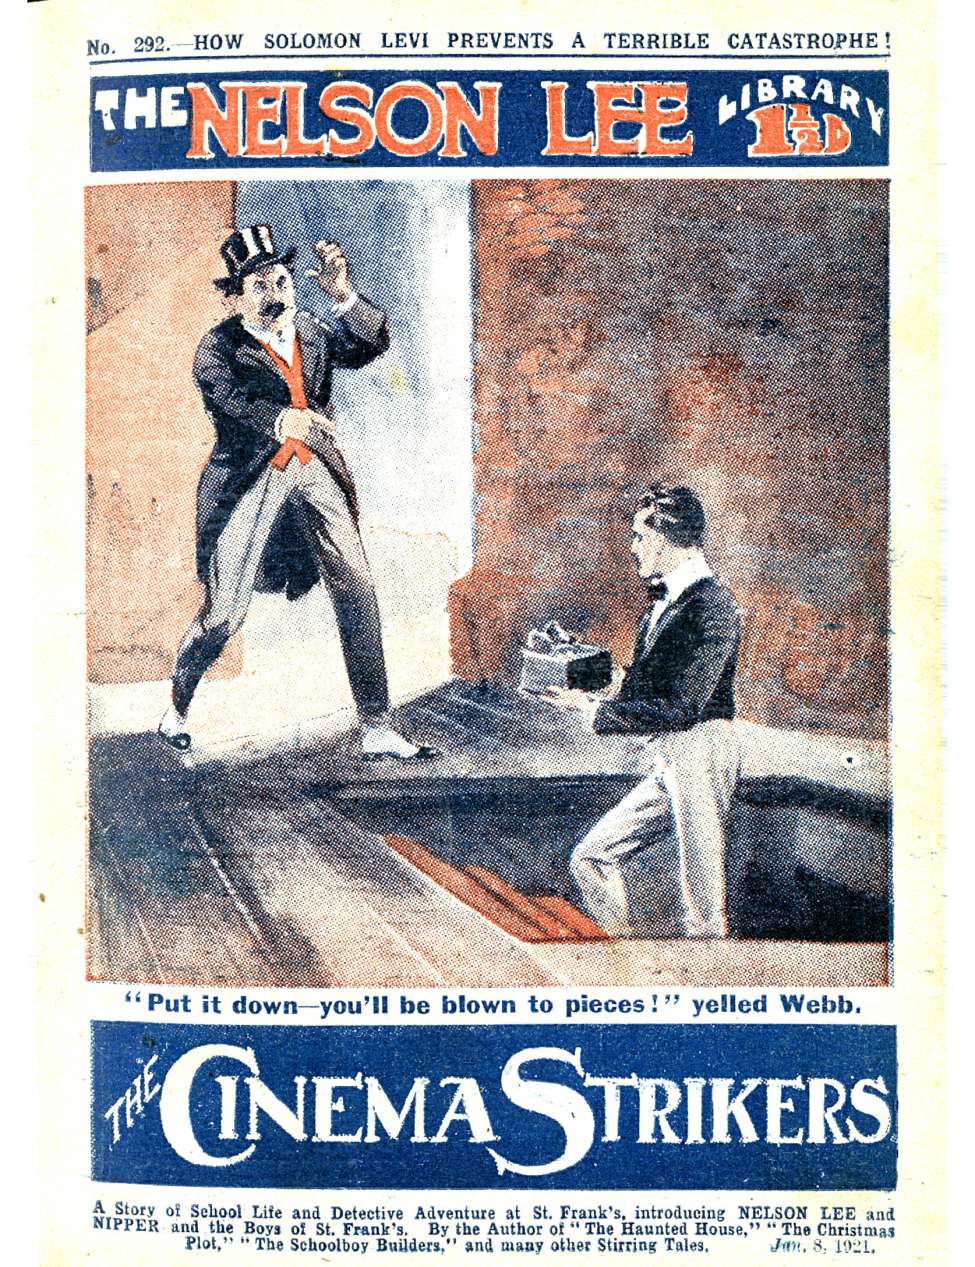 Book Cover For Nelson Lee Library s1 292 - The Cinema Strikers